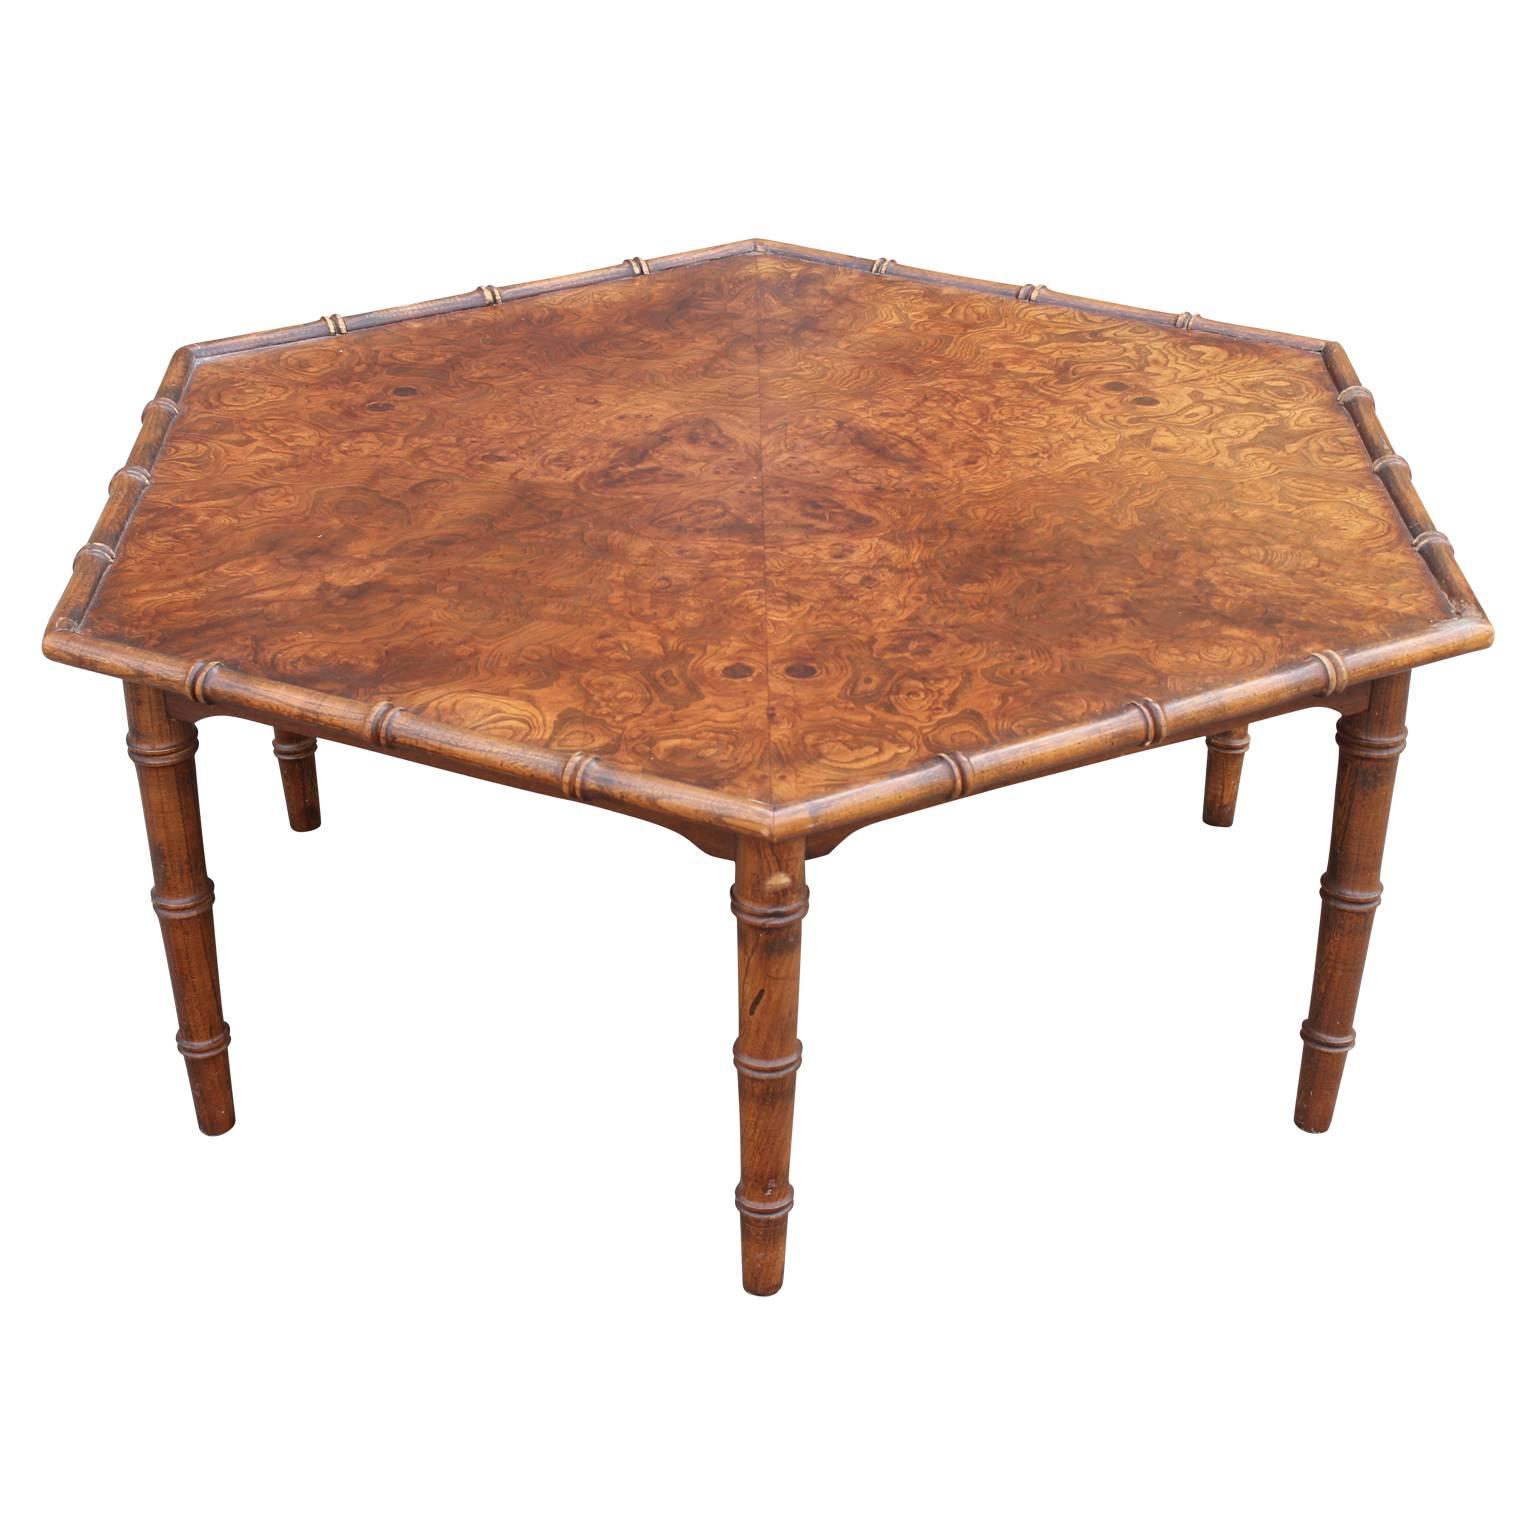 Modern burl walnut or carpathian elm hexagonal faux bamboo coffee table in the shape of a hexagon with an exceptional pattern in the wood graving. We also have the glass top available (as shown in the last picture) if interested.